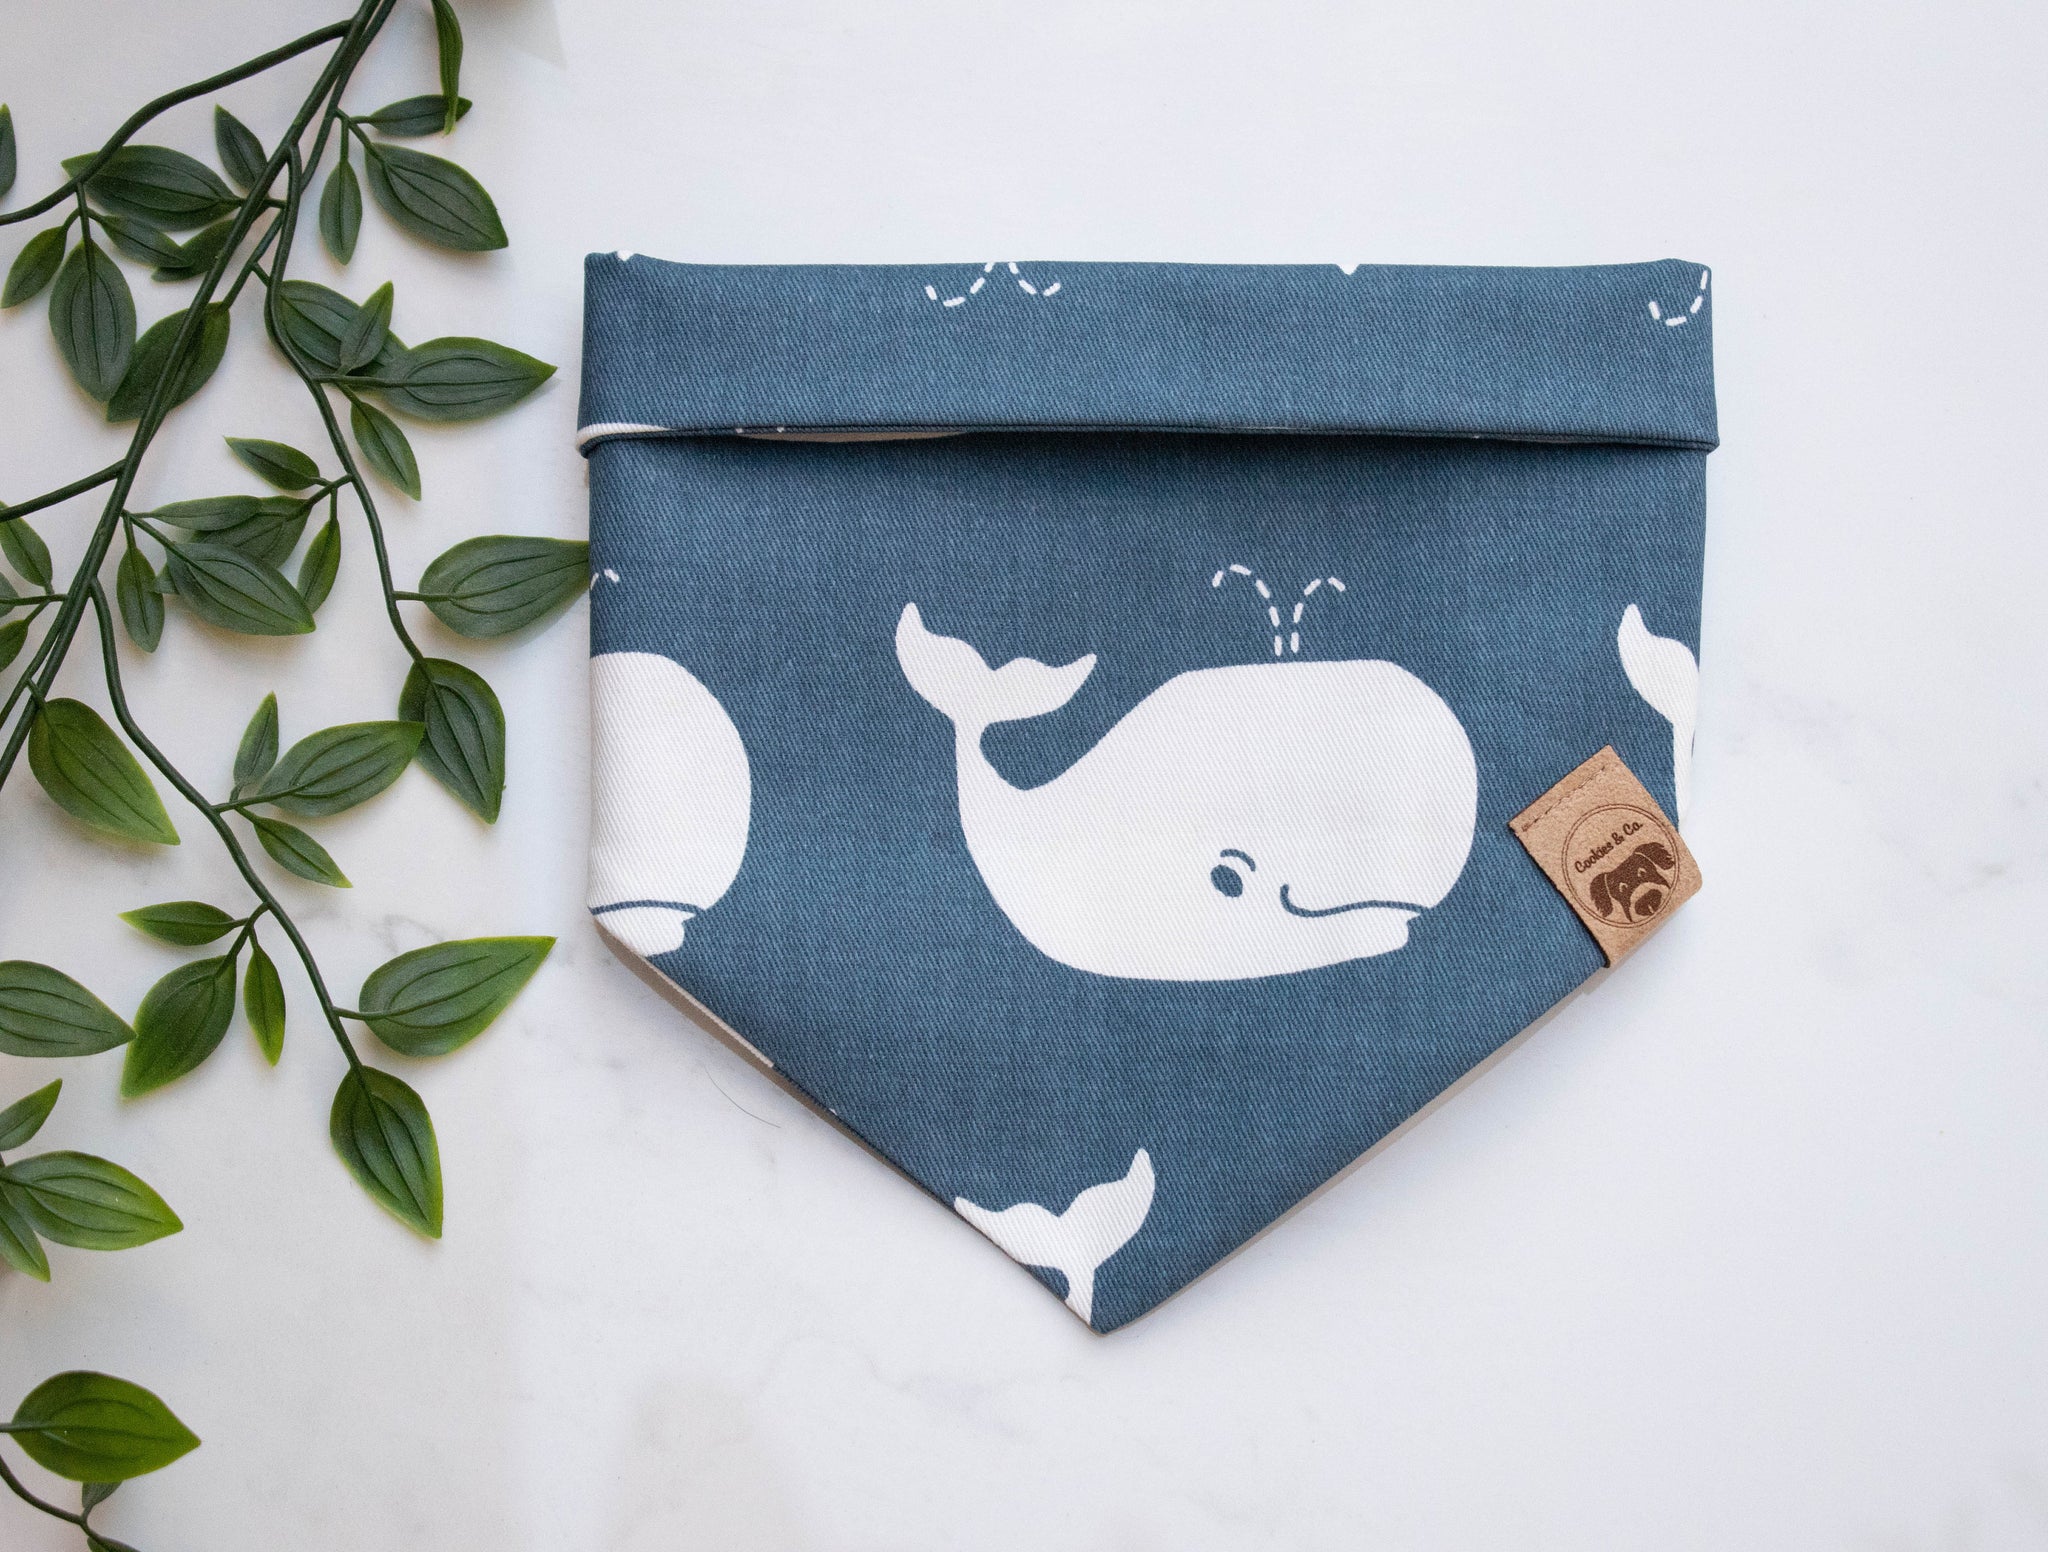 Oh Whale bandana print, featuring large white whales with water spurting out of their blow hole, on a deep dark blue fabric